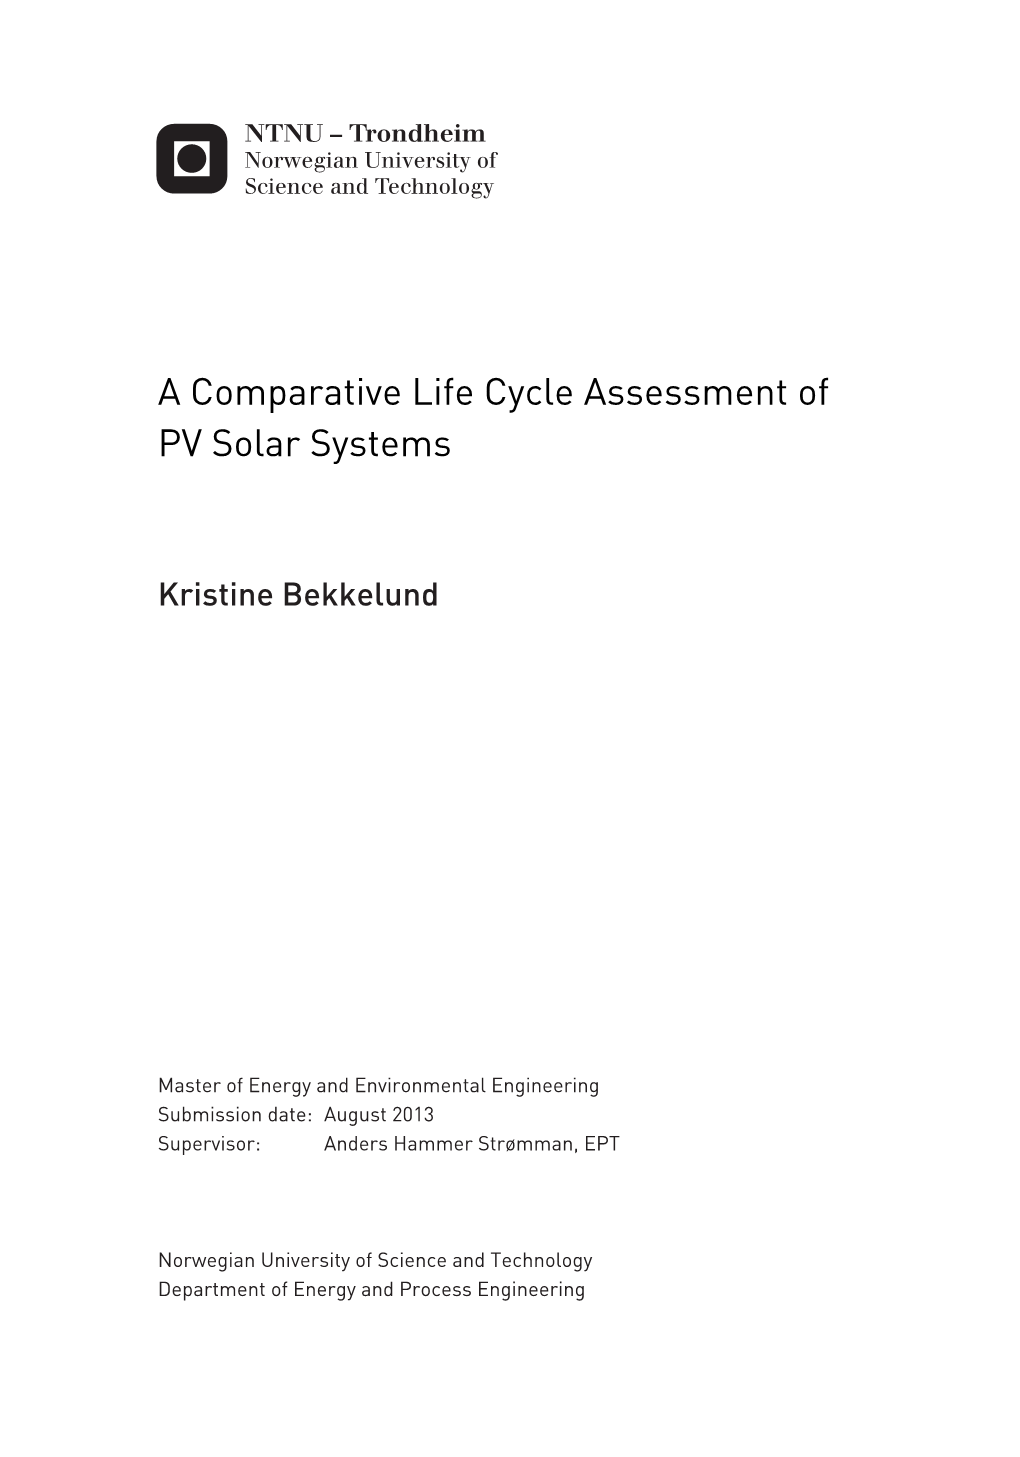 A Comparative Life Cycle Assessment of PV Solar Systems